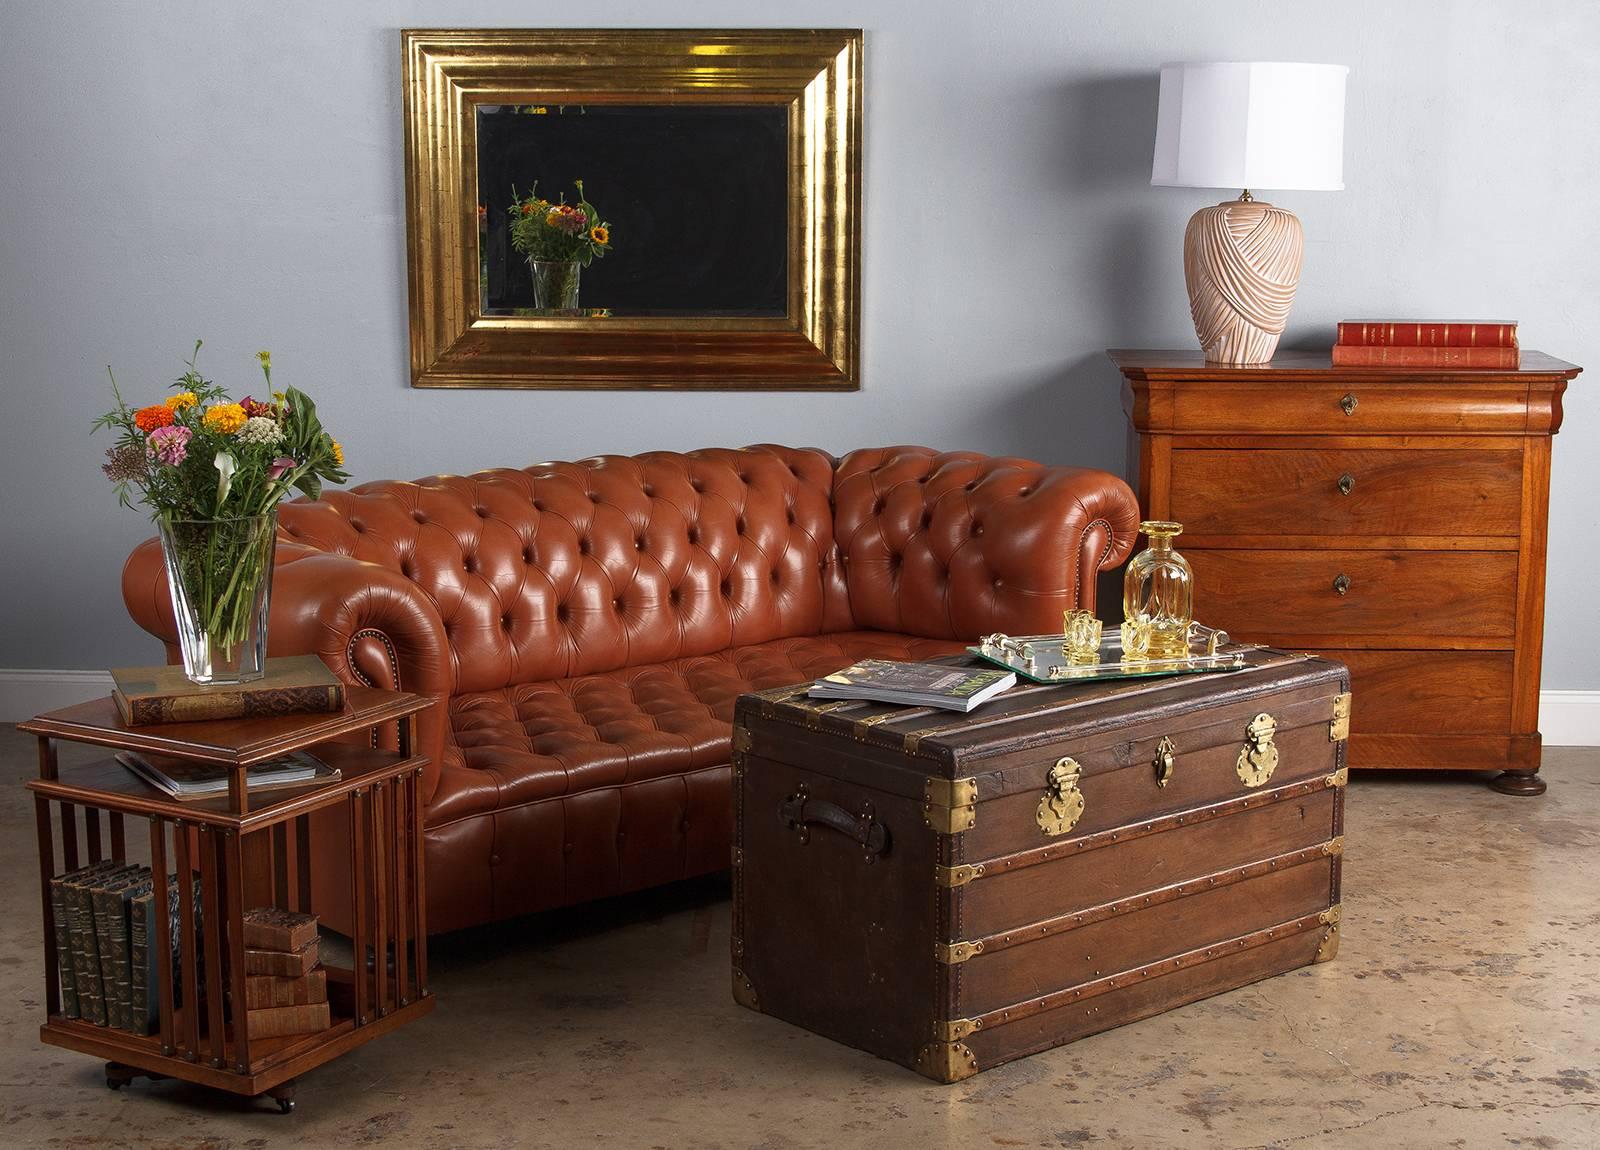 A vintage Chesterfield three-seat sofa in caramel colored tufted leather, circa 1960s. Tight button tufts dot the seat, backrest, arms and front, the sides and back are flat. Antique nailhead trim highlights the front corners and graceful curve of